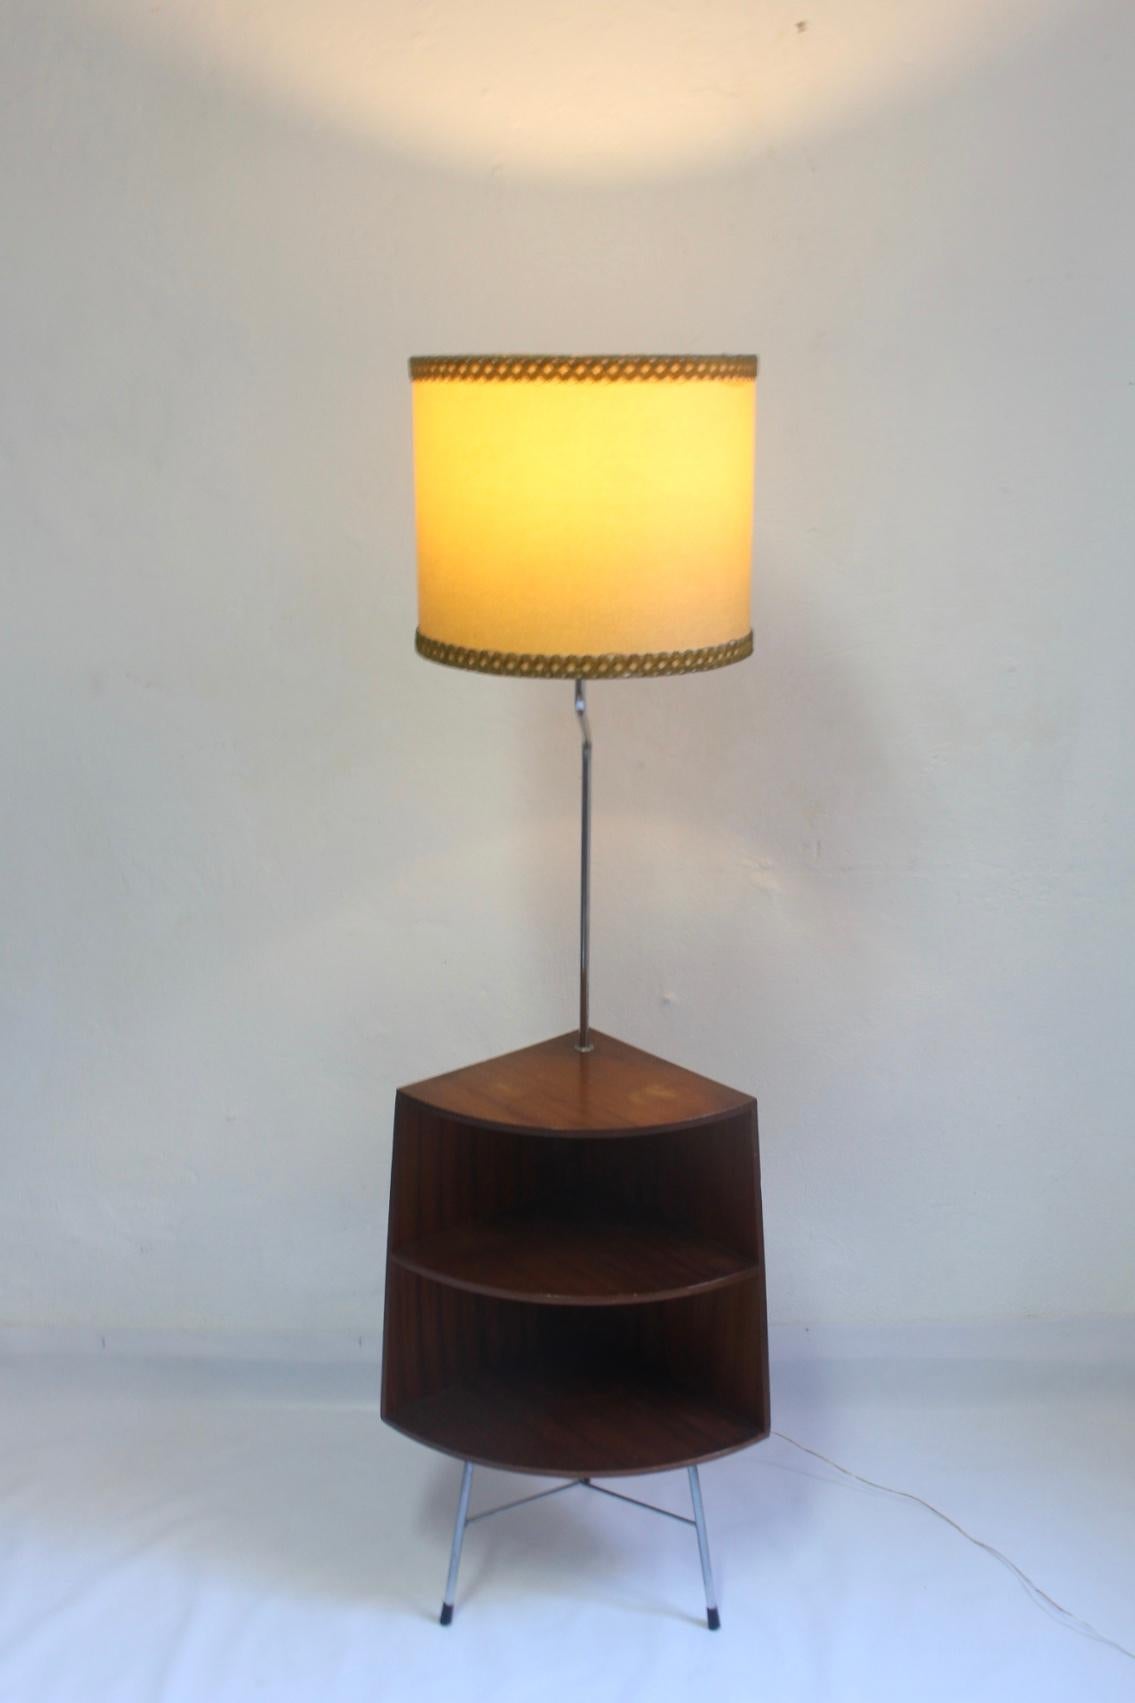 Midcentury articulated floor lamp with original shade and plywood corner table, Spain, circa 1960s. Corner table measurements are (D x W x H): 35 cm x 35 cm x 70 cm.